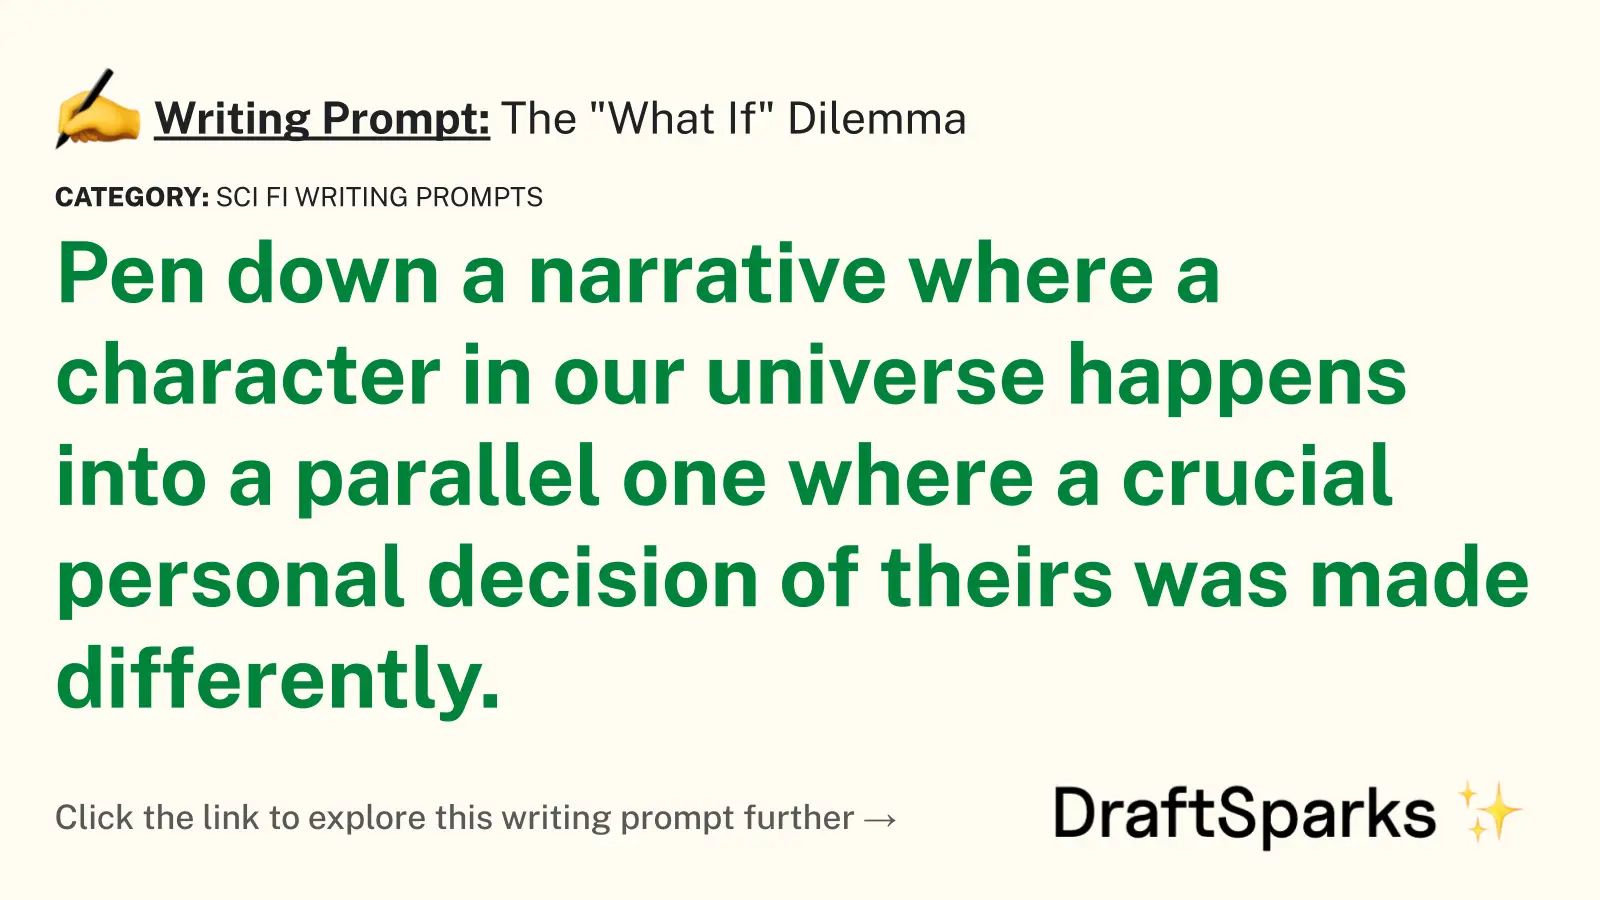 The “What If” Dilemma